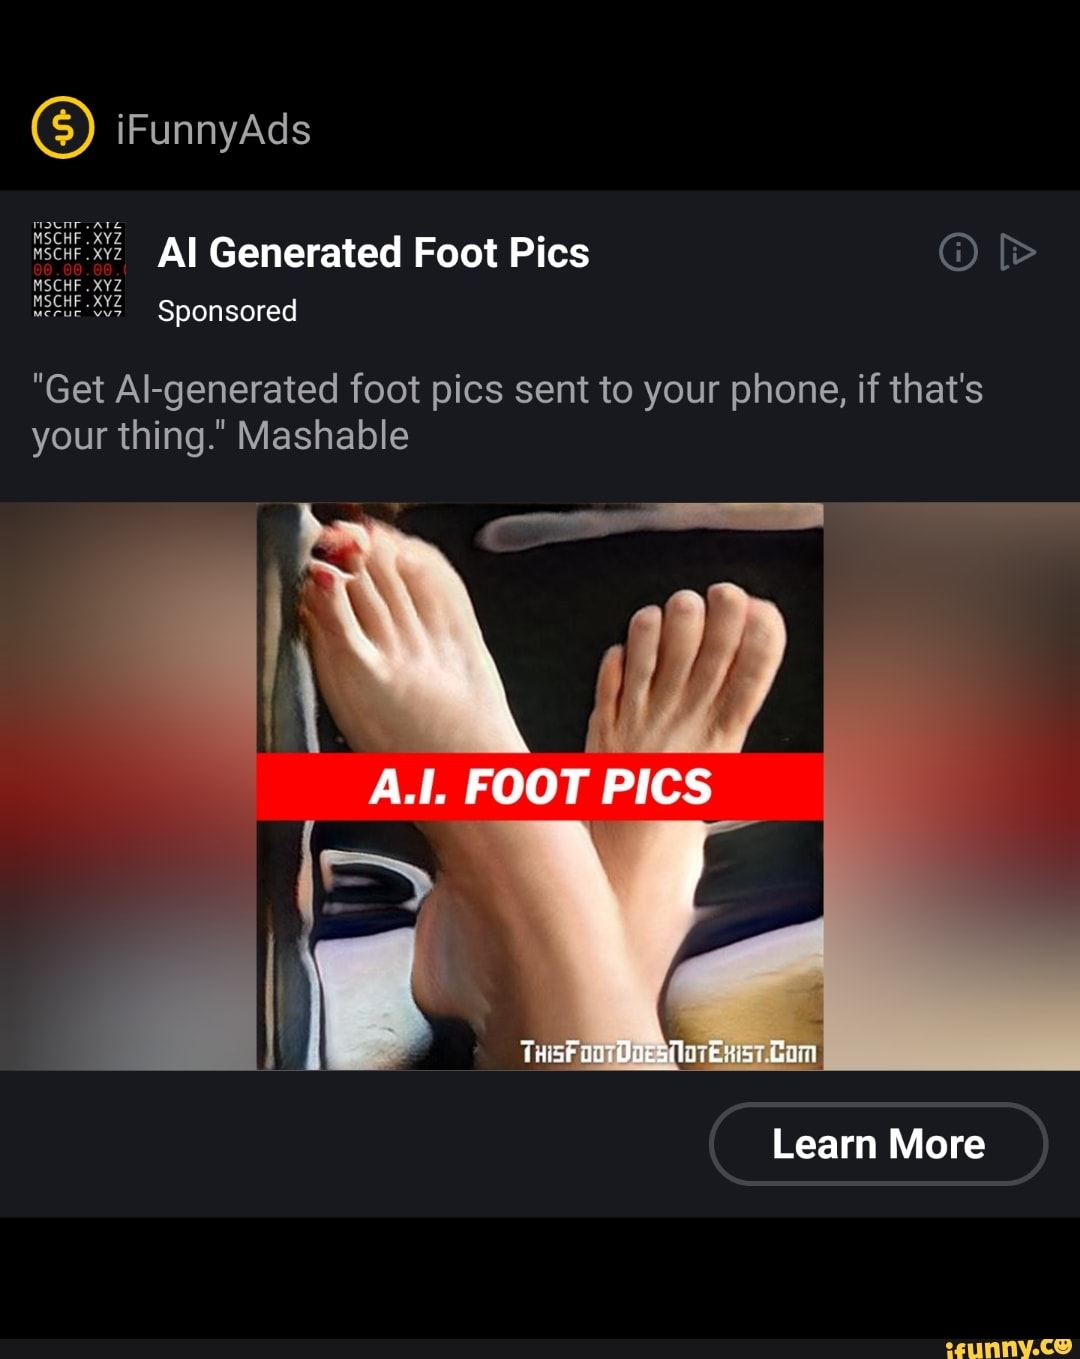 Get AI-generated foot pics sent to your phone, if that's your